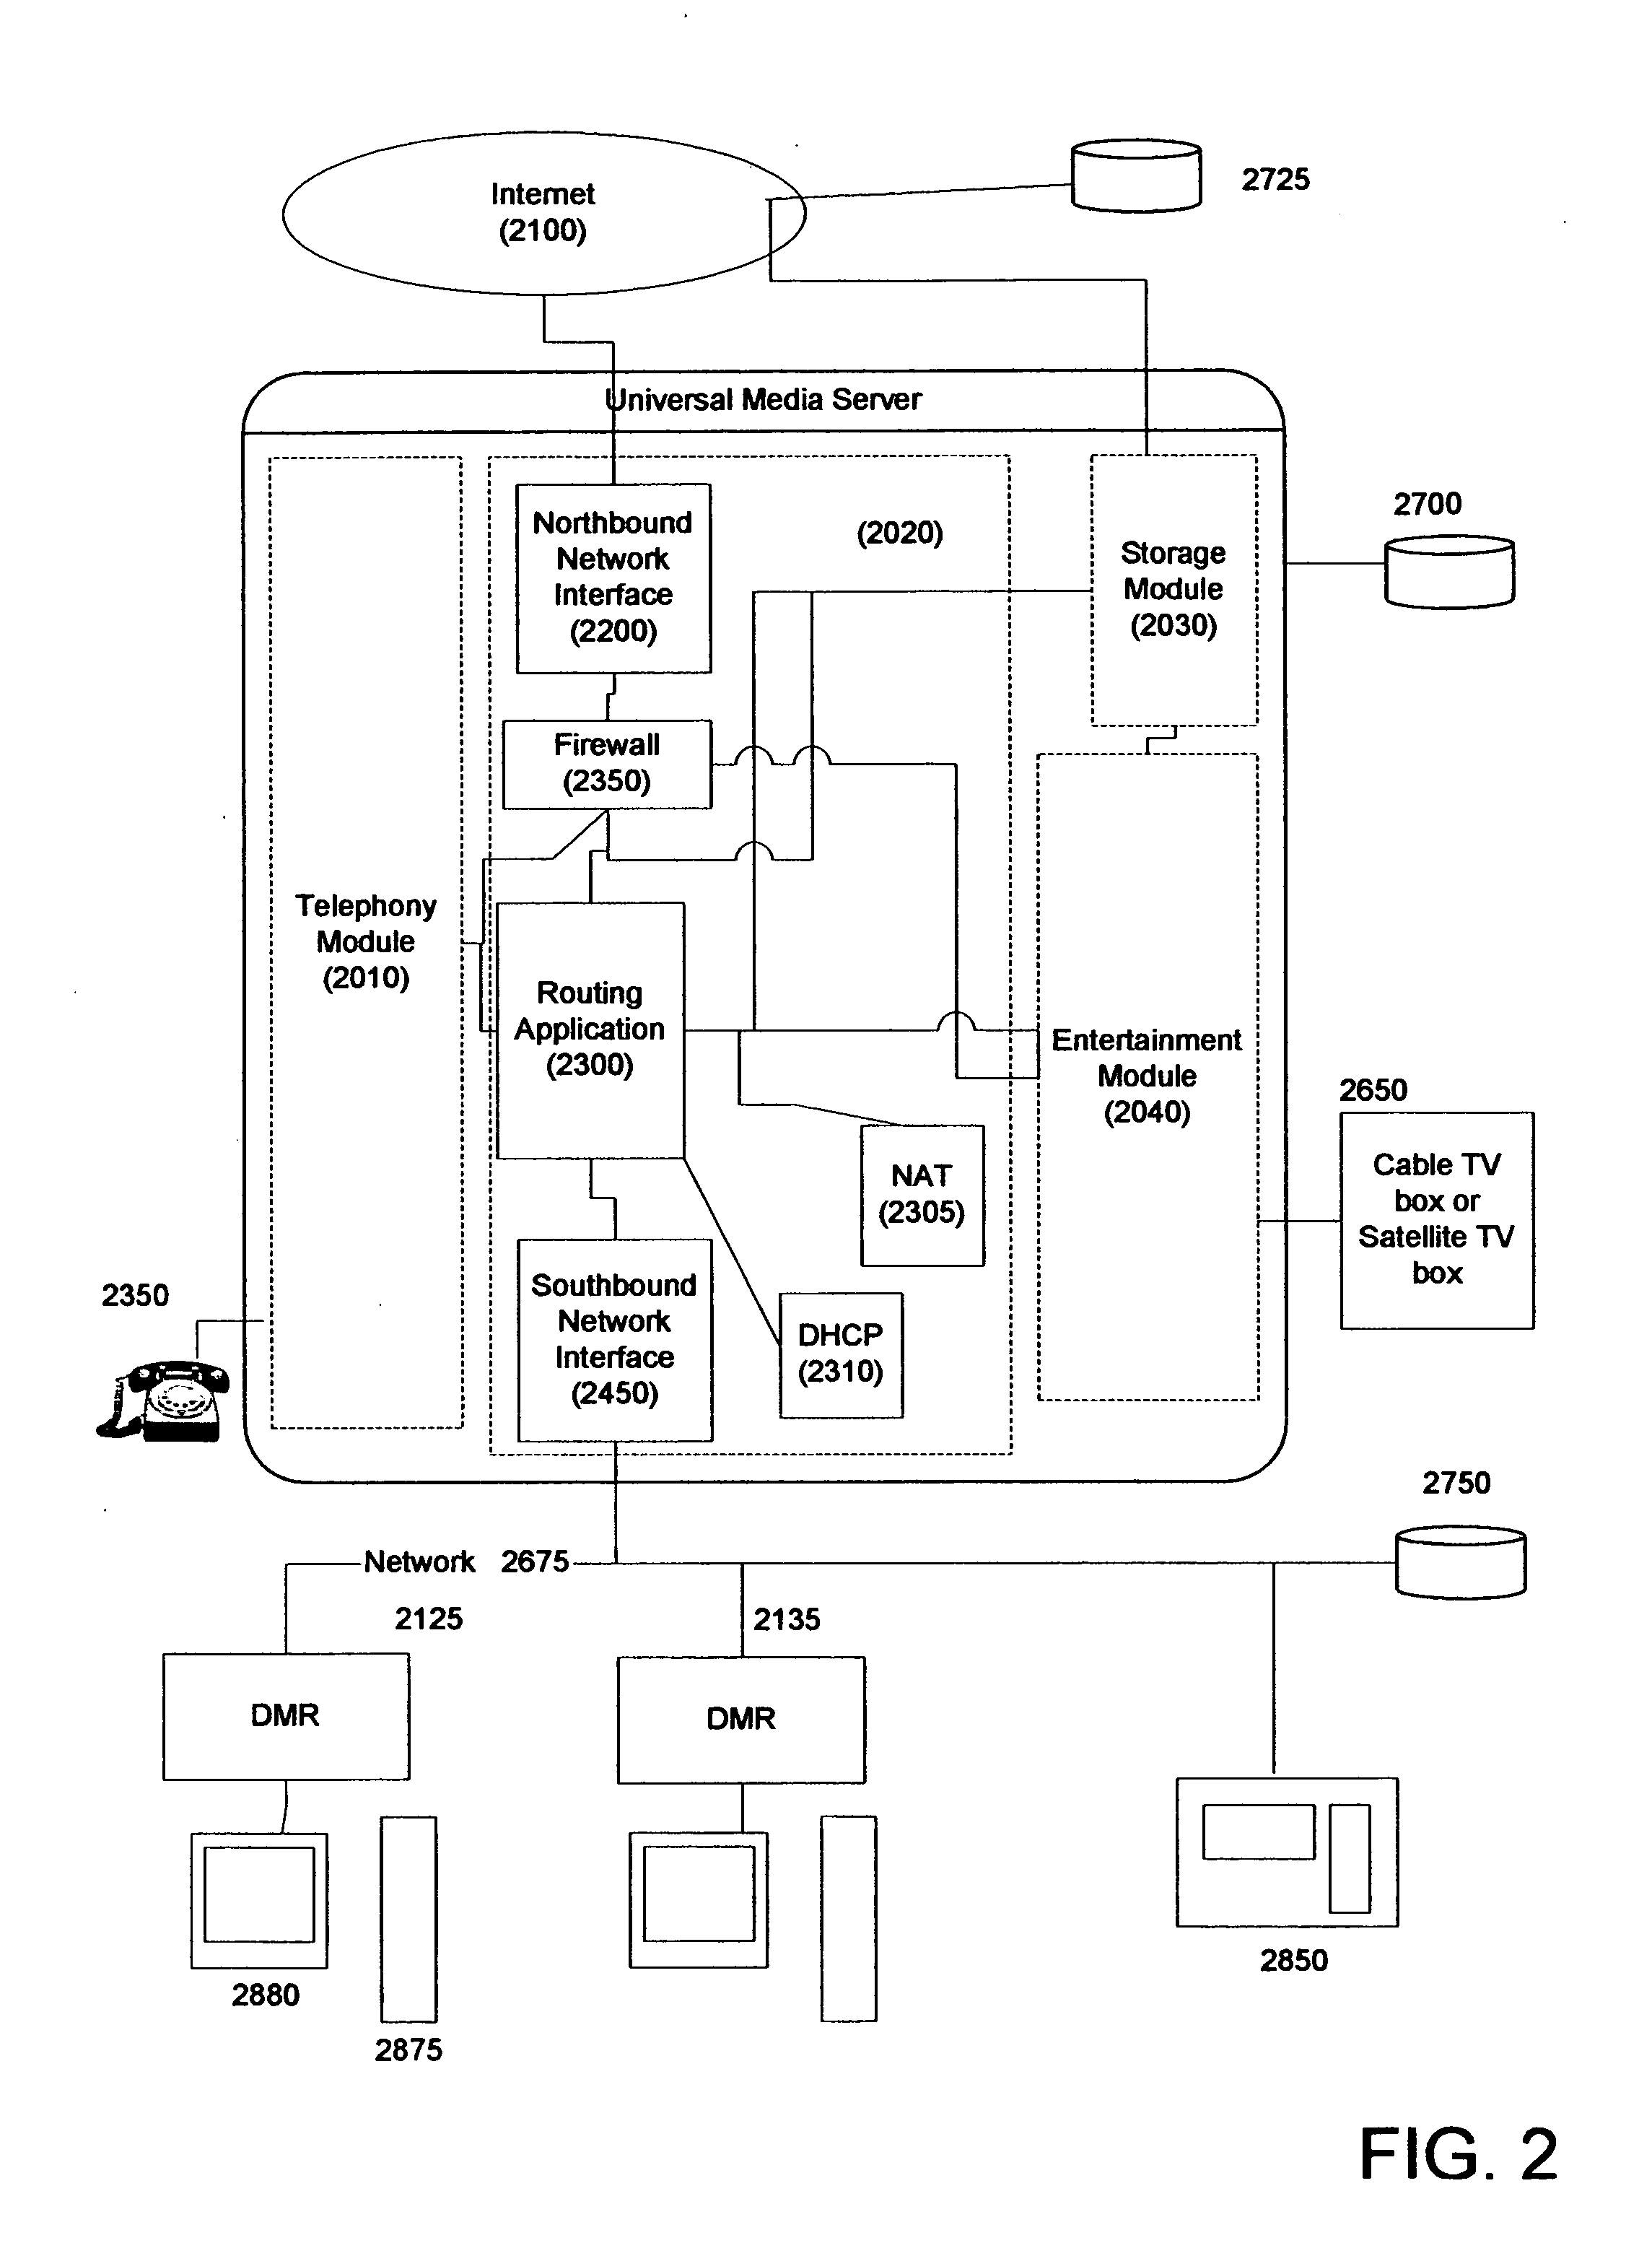 Systems and methods for a universal media server with integrated networking and telephony